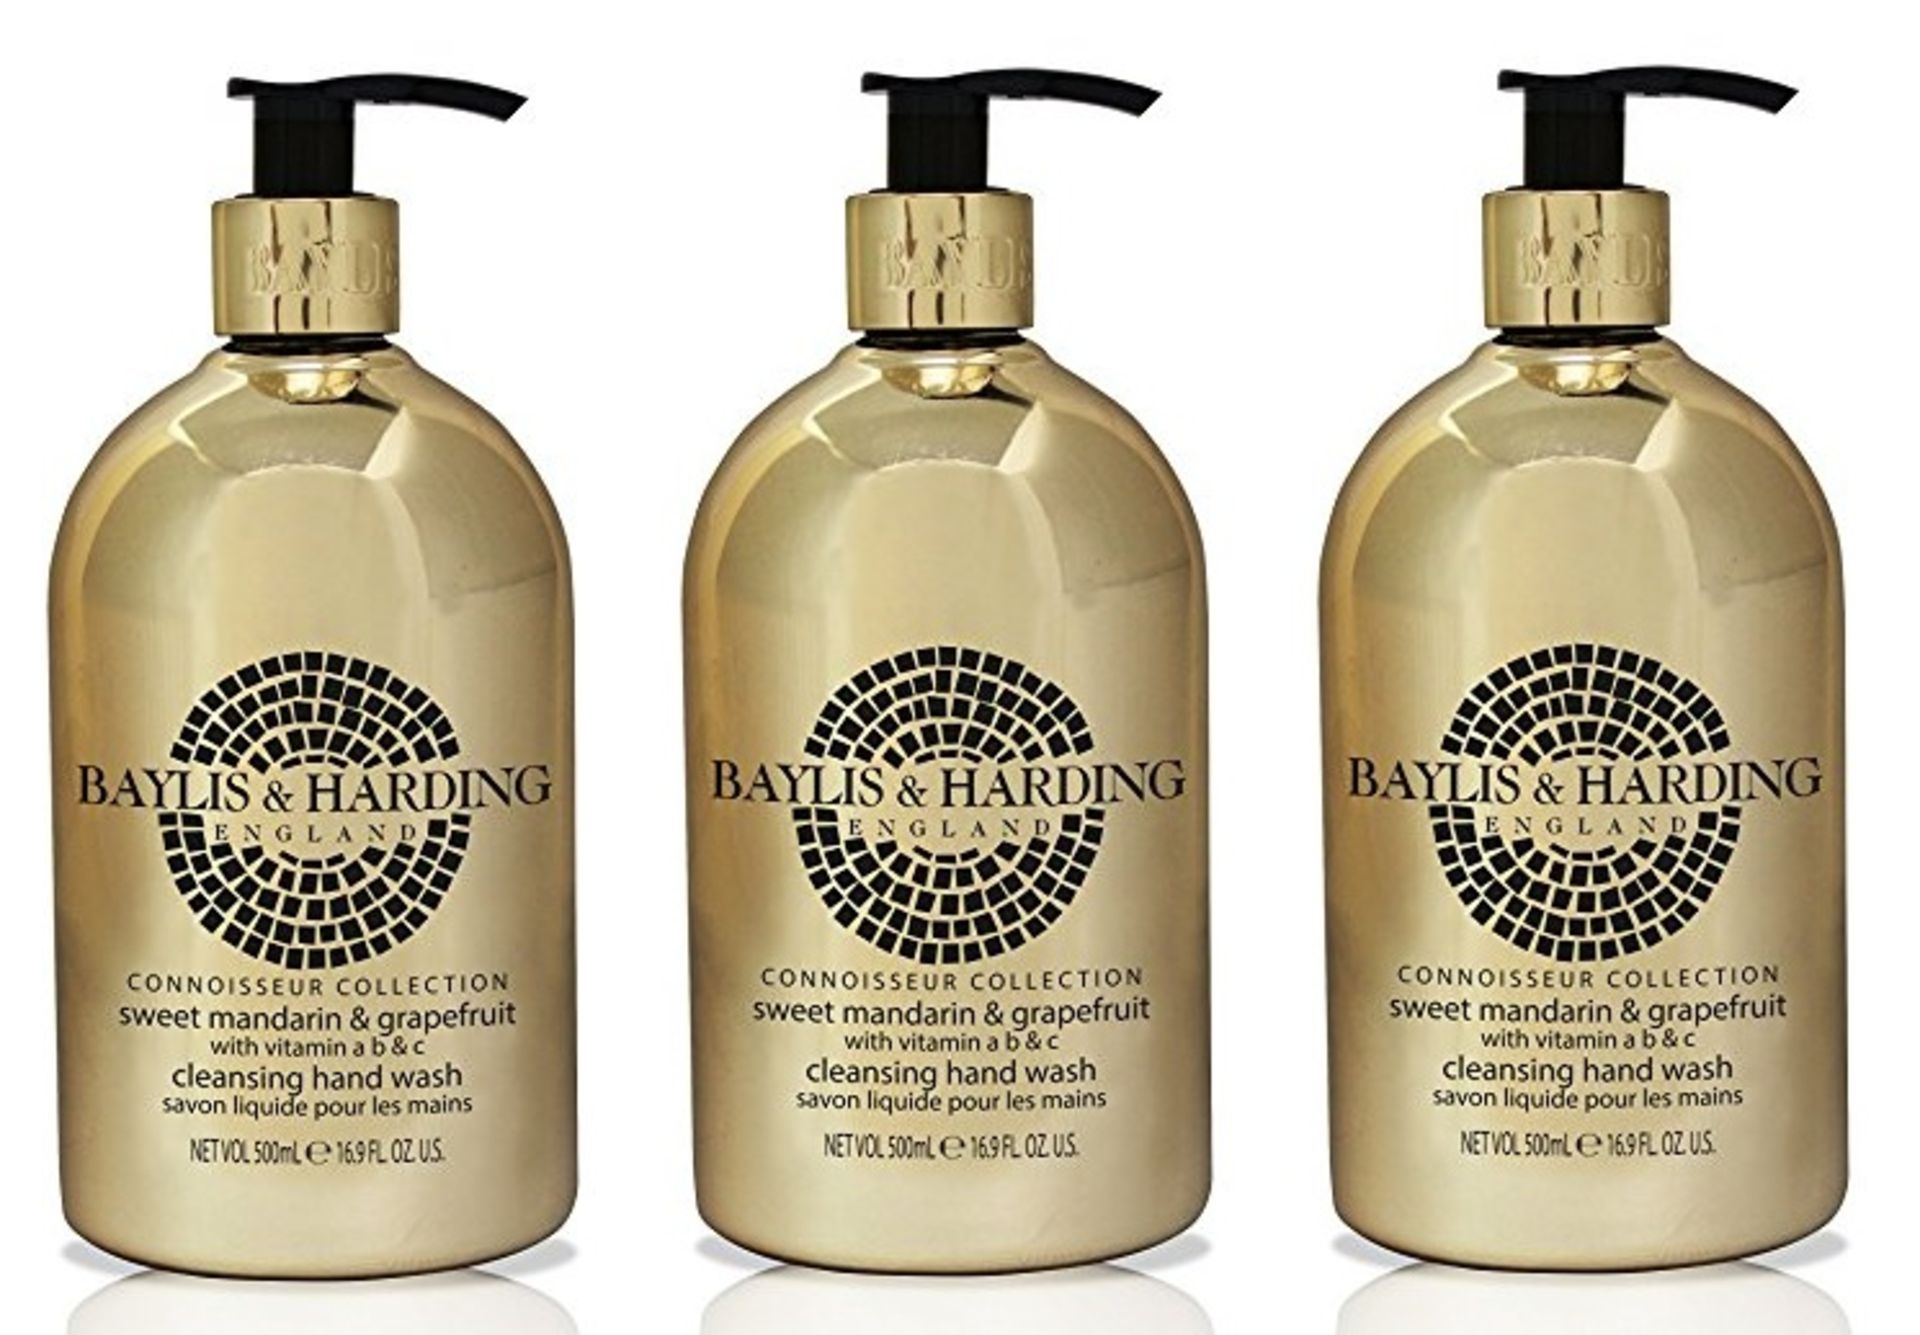 V Brand New 3 x Limited Edition Baylis & Harding Mosaic Connoisseur 500ml Sweet Manderin And